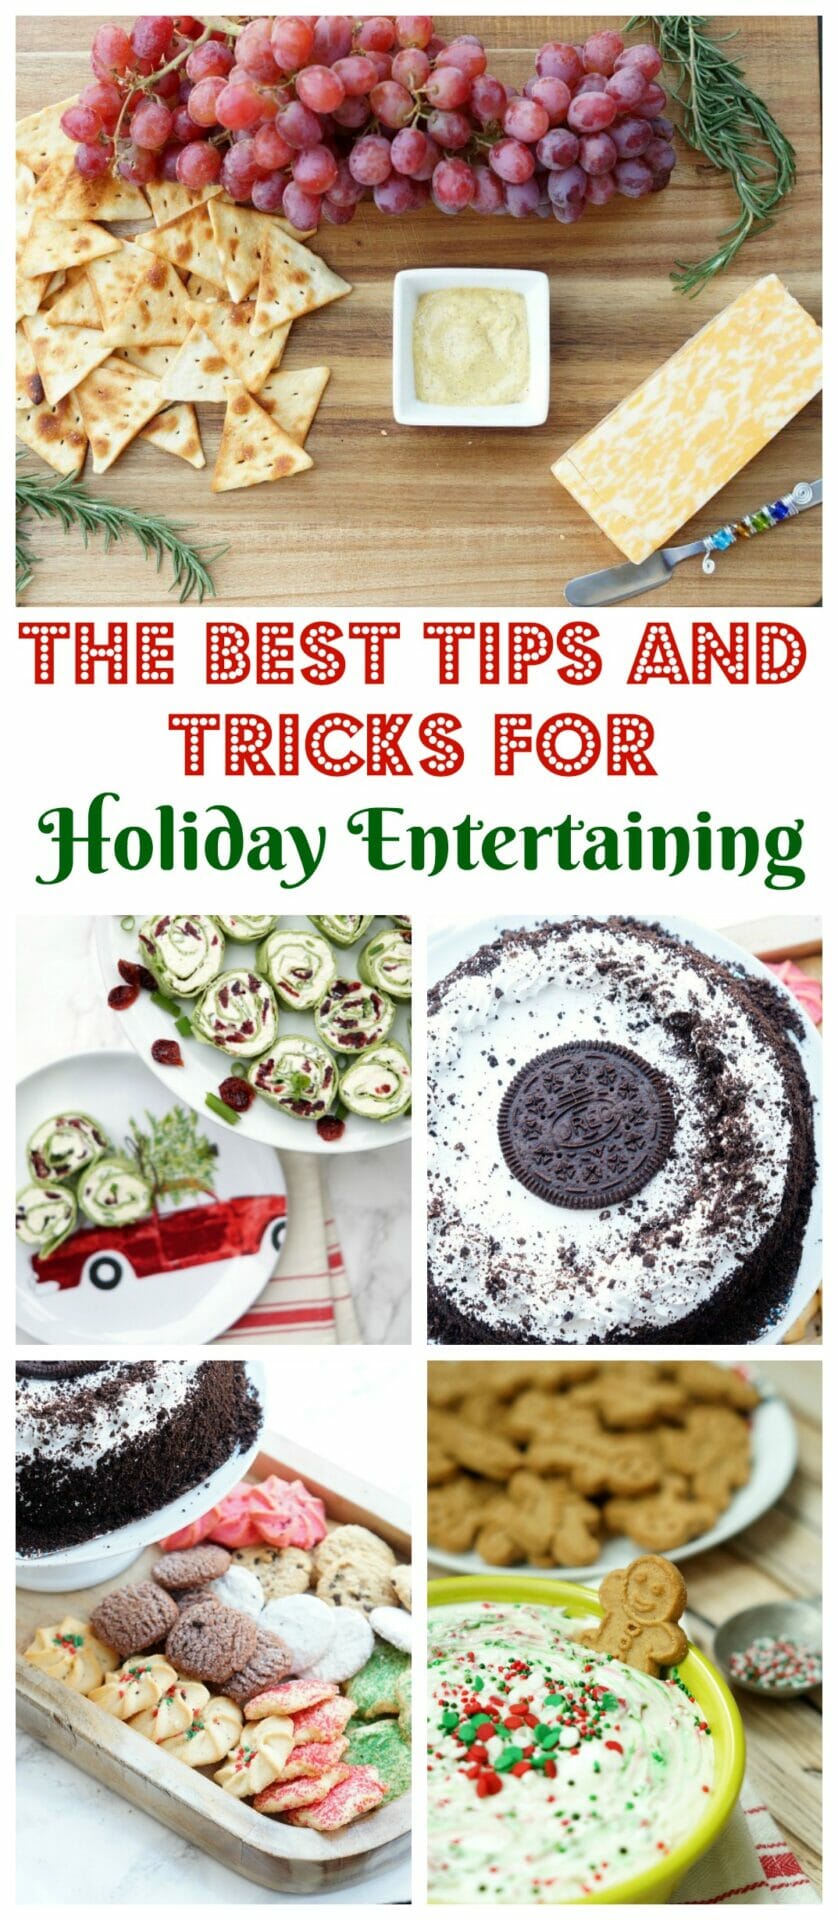 Sharing all my holiday tips and tricks, including my formula for no fail holiday entertaining!